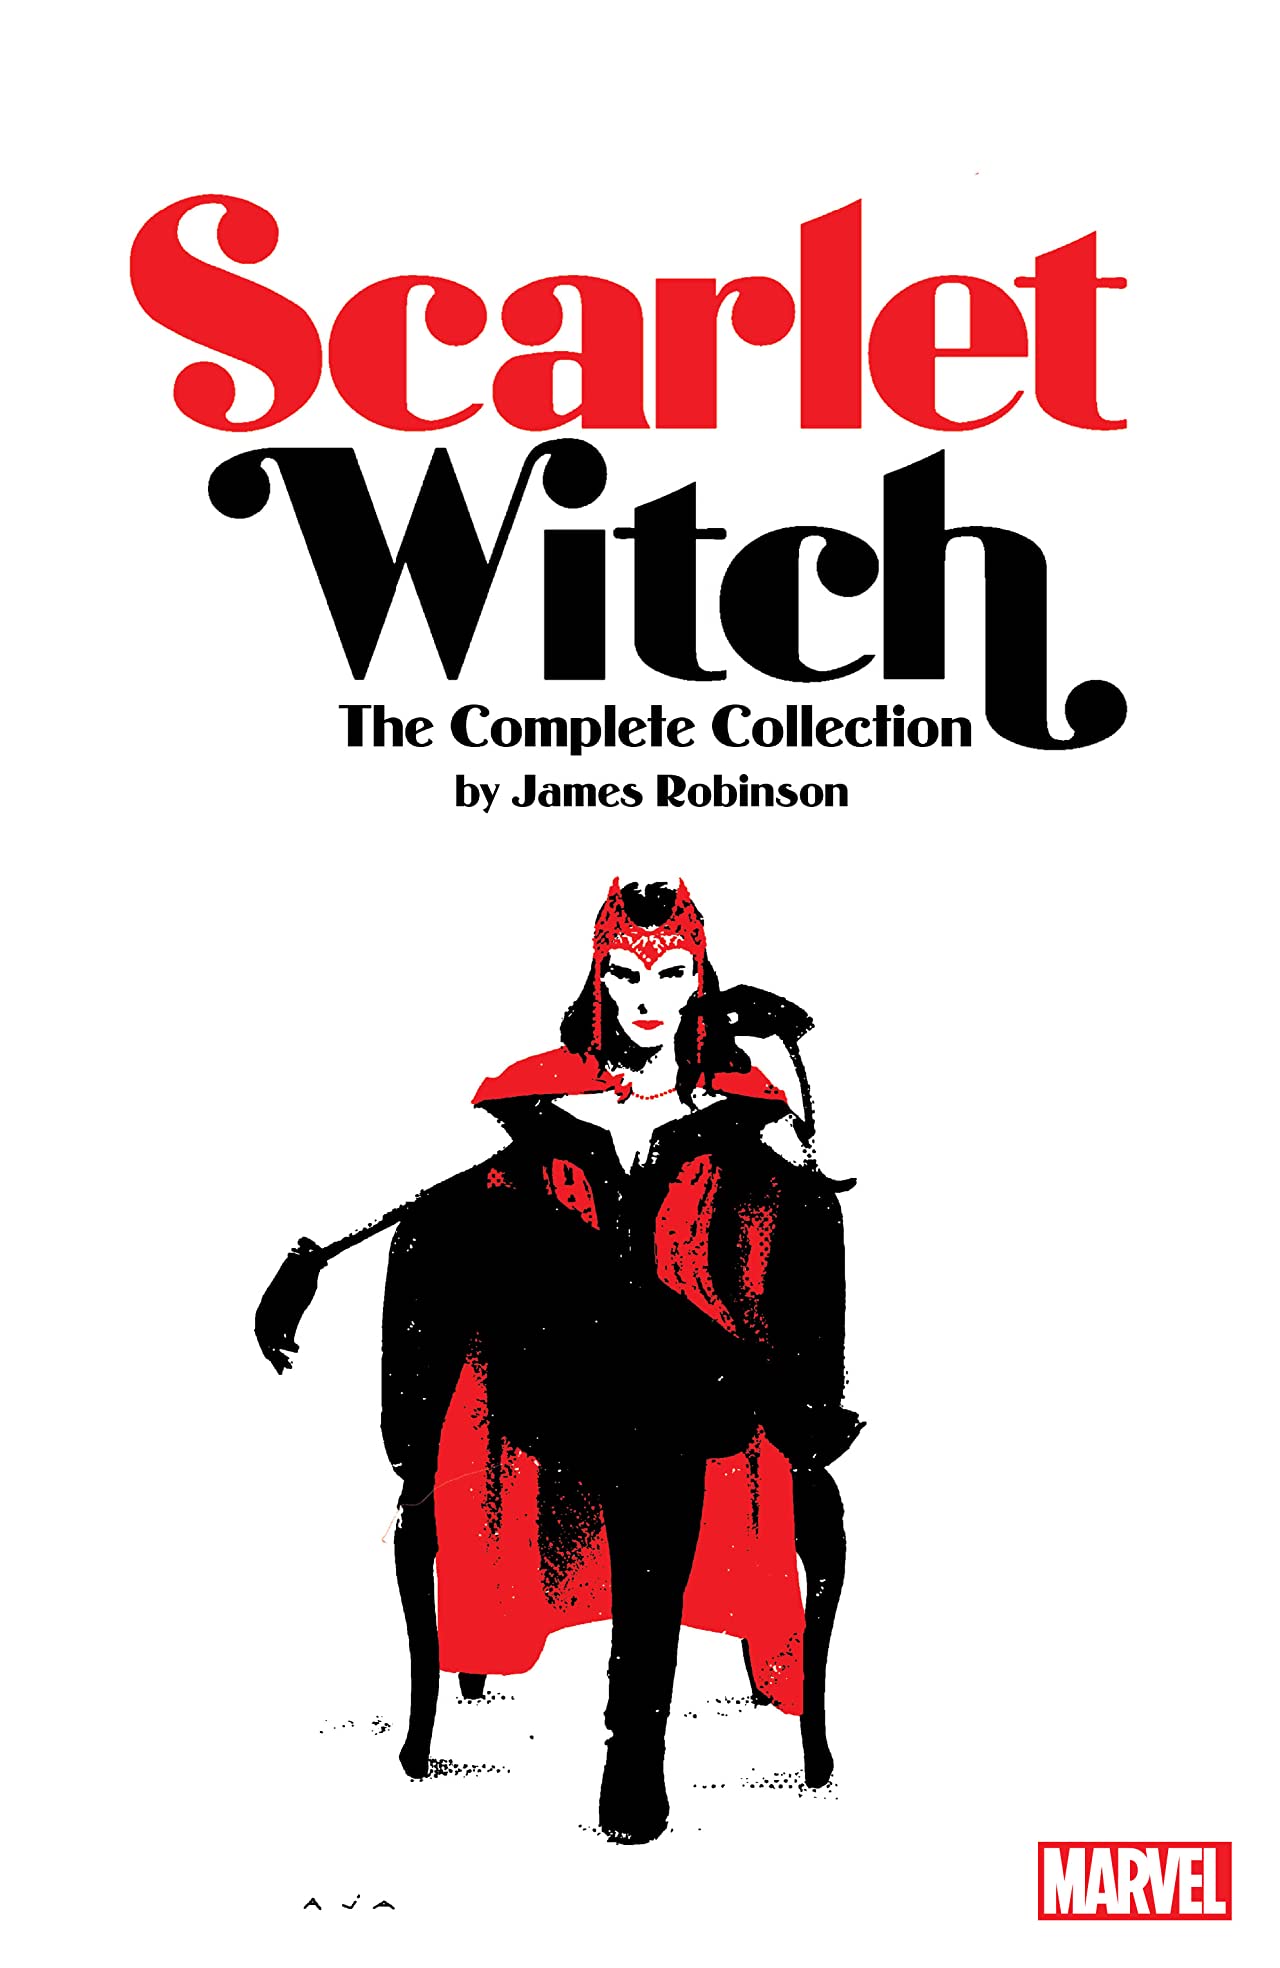 Scarlet Witch by James Robinson Complete Collection Graphic Novel